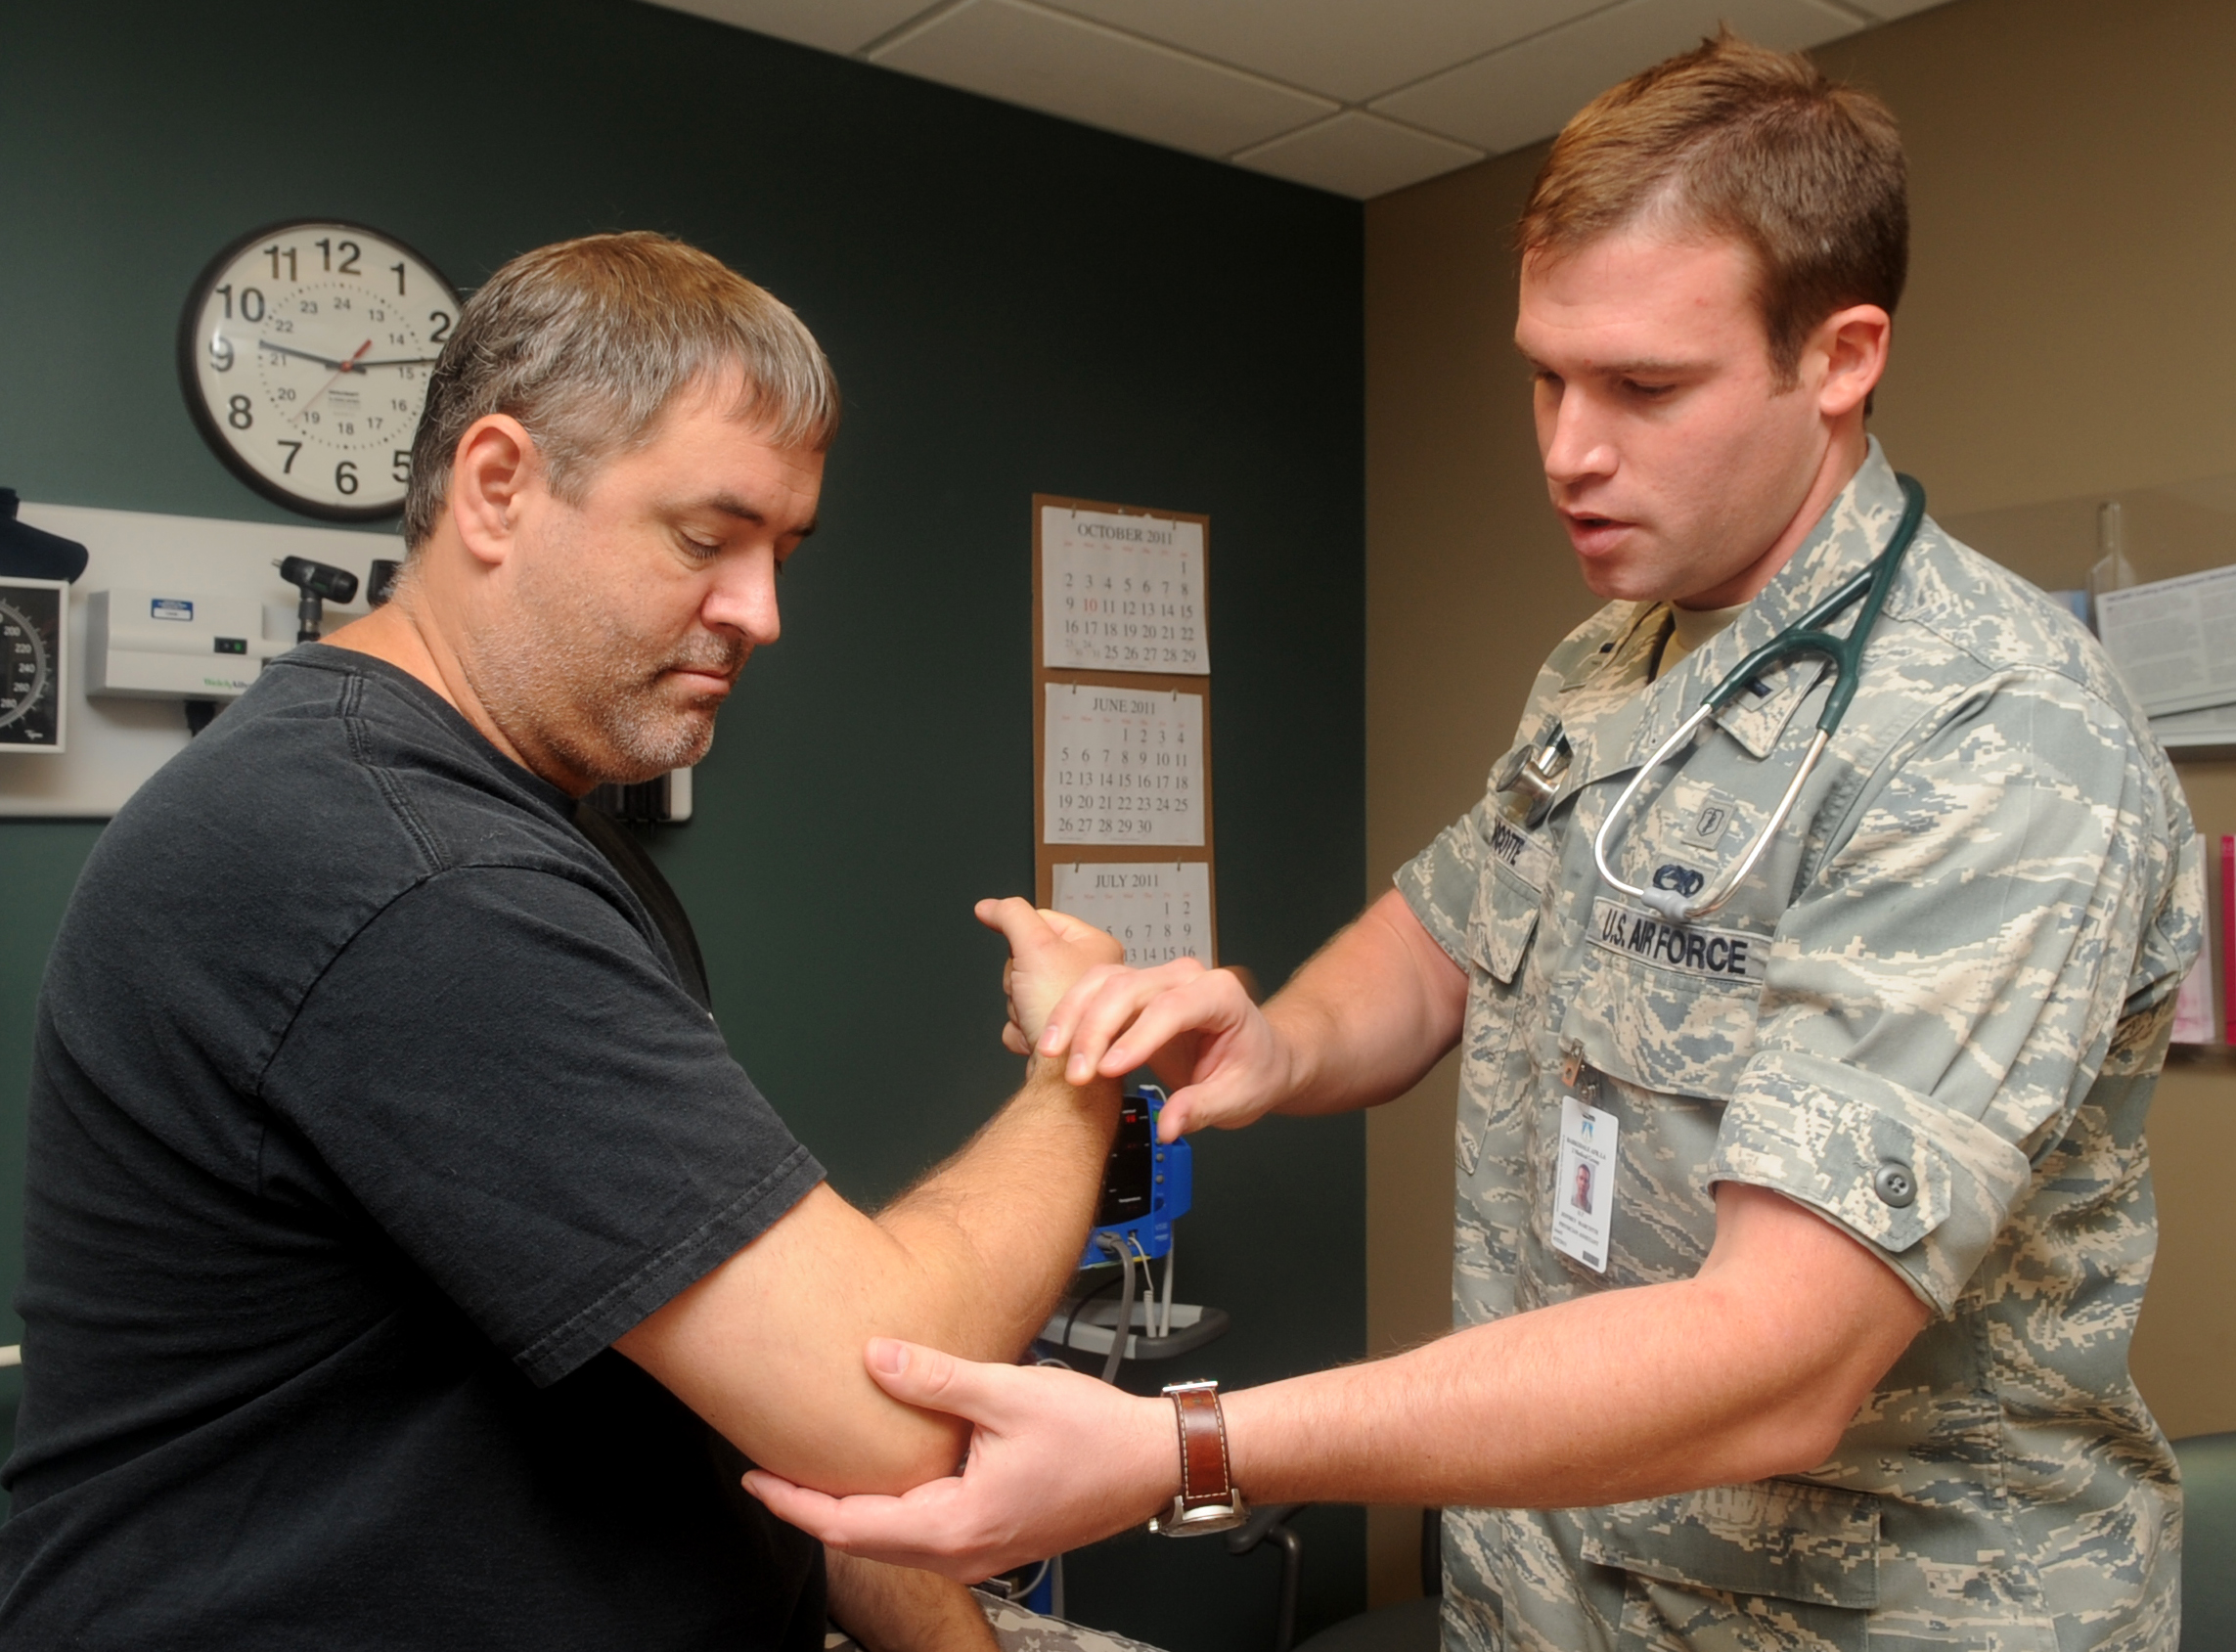 A day in the life of a primary care physician > Barksdale Air Force